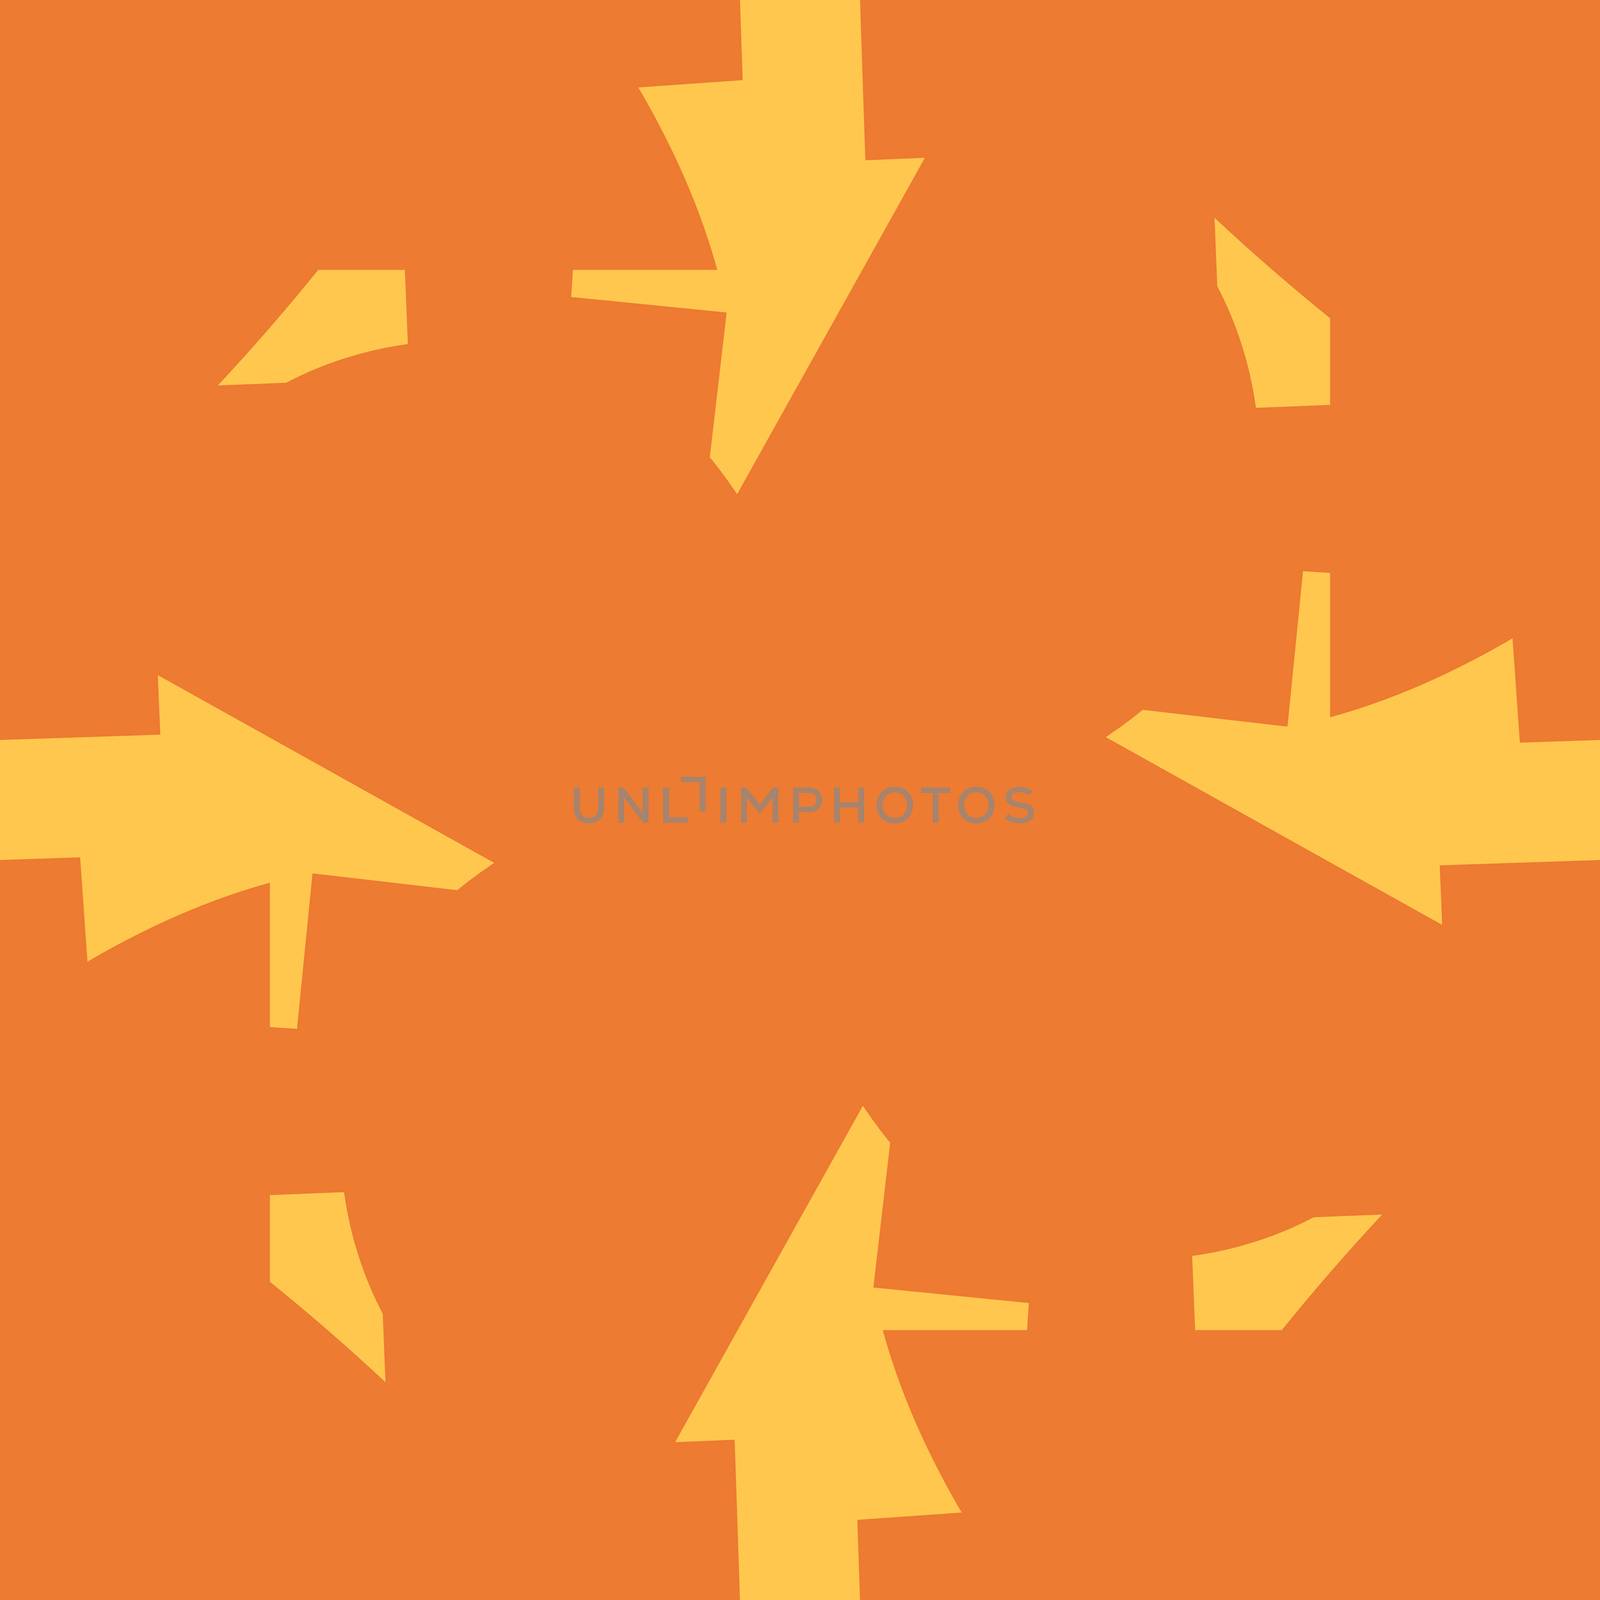 Abstract Arrow Shapes Over Orange by TheBlackRhino